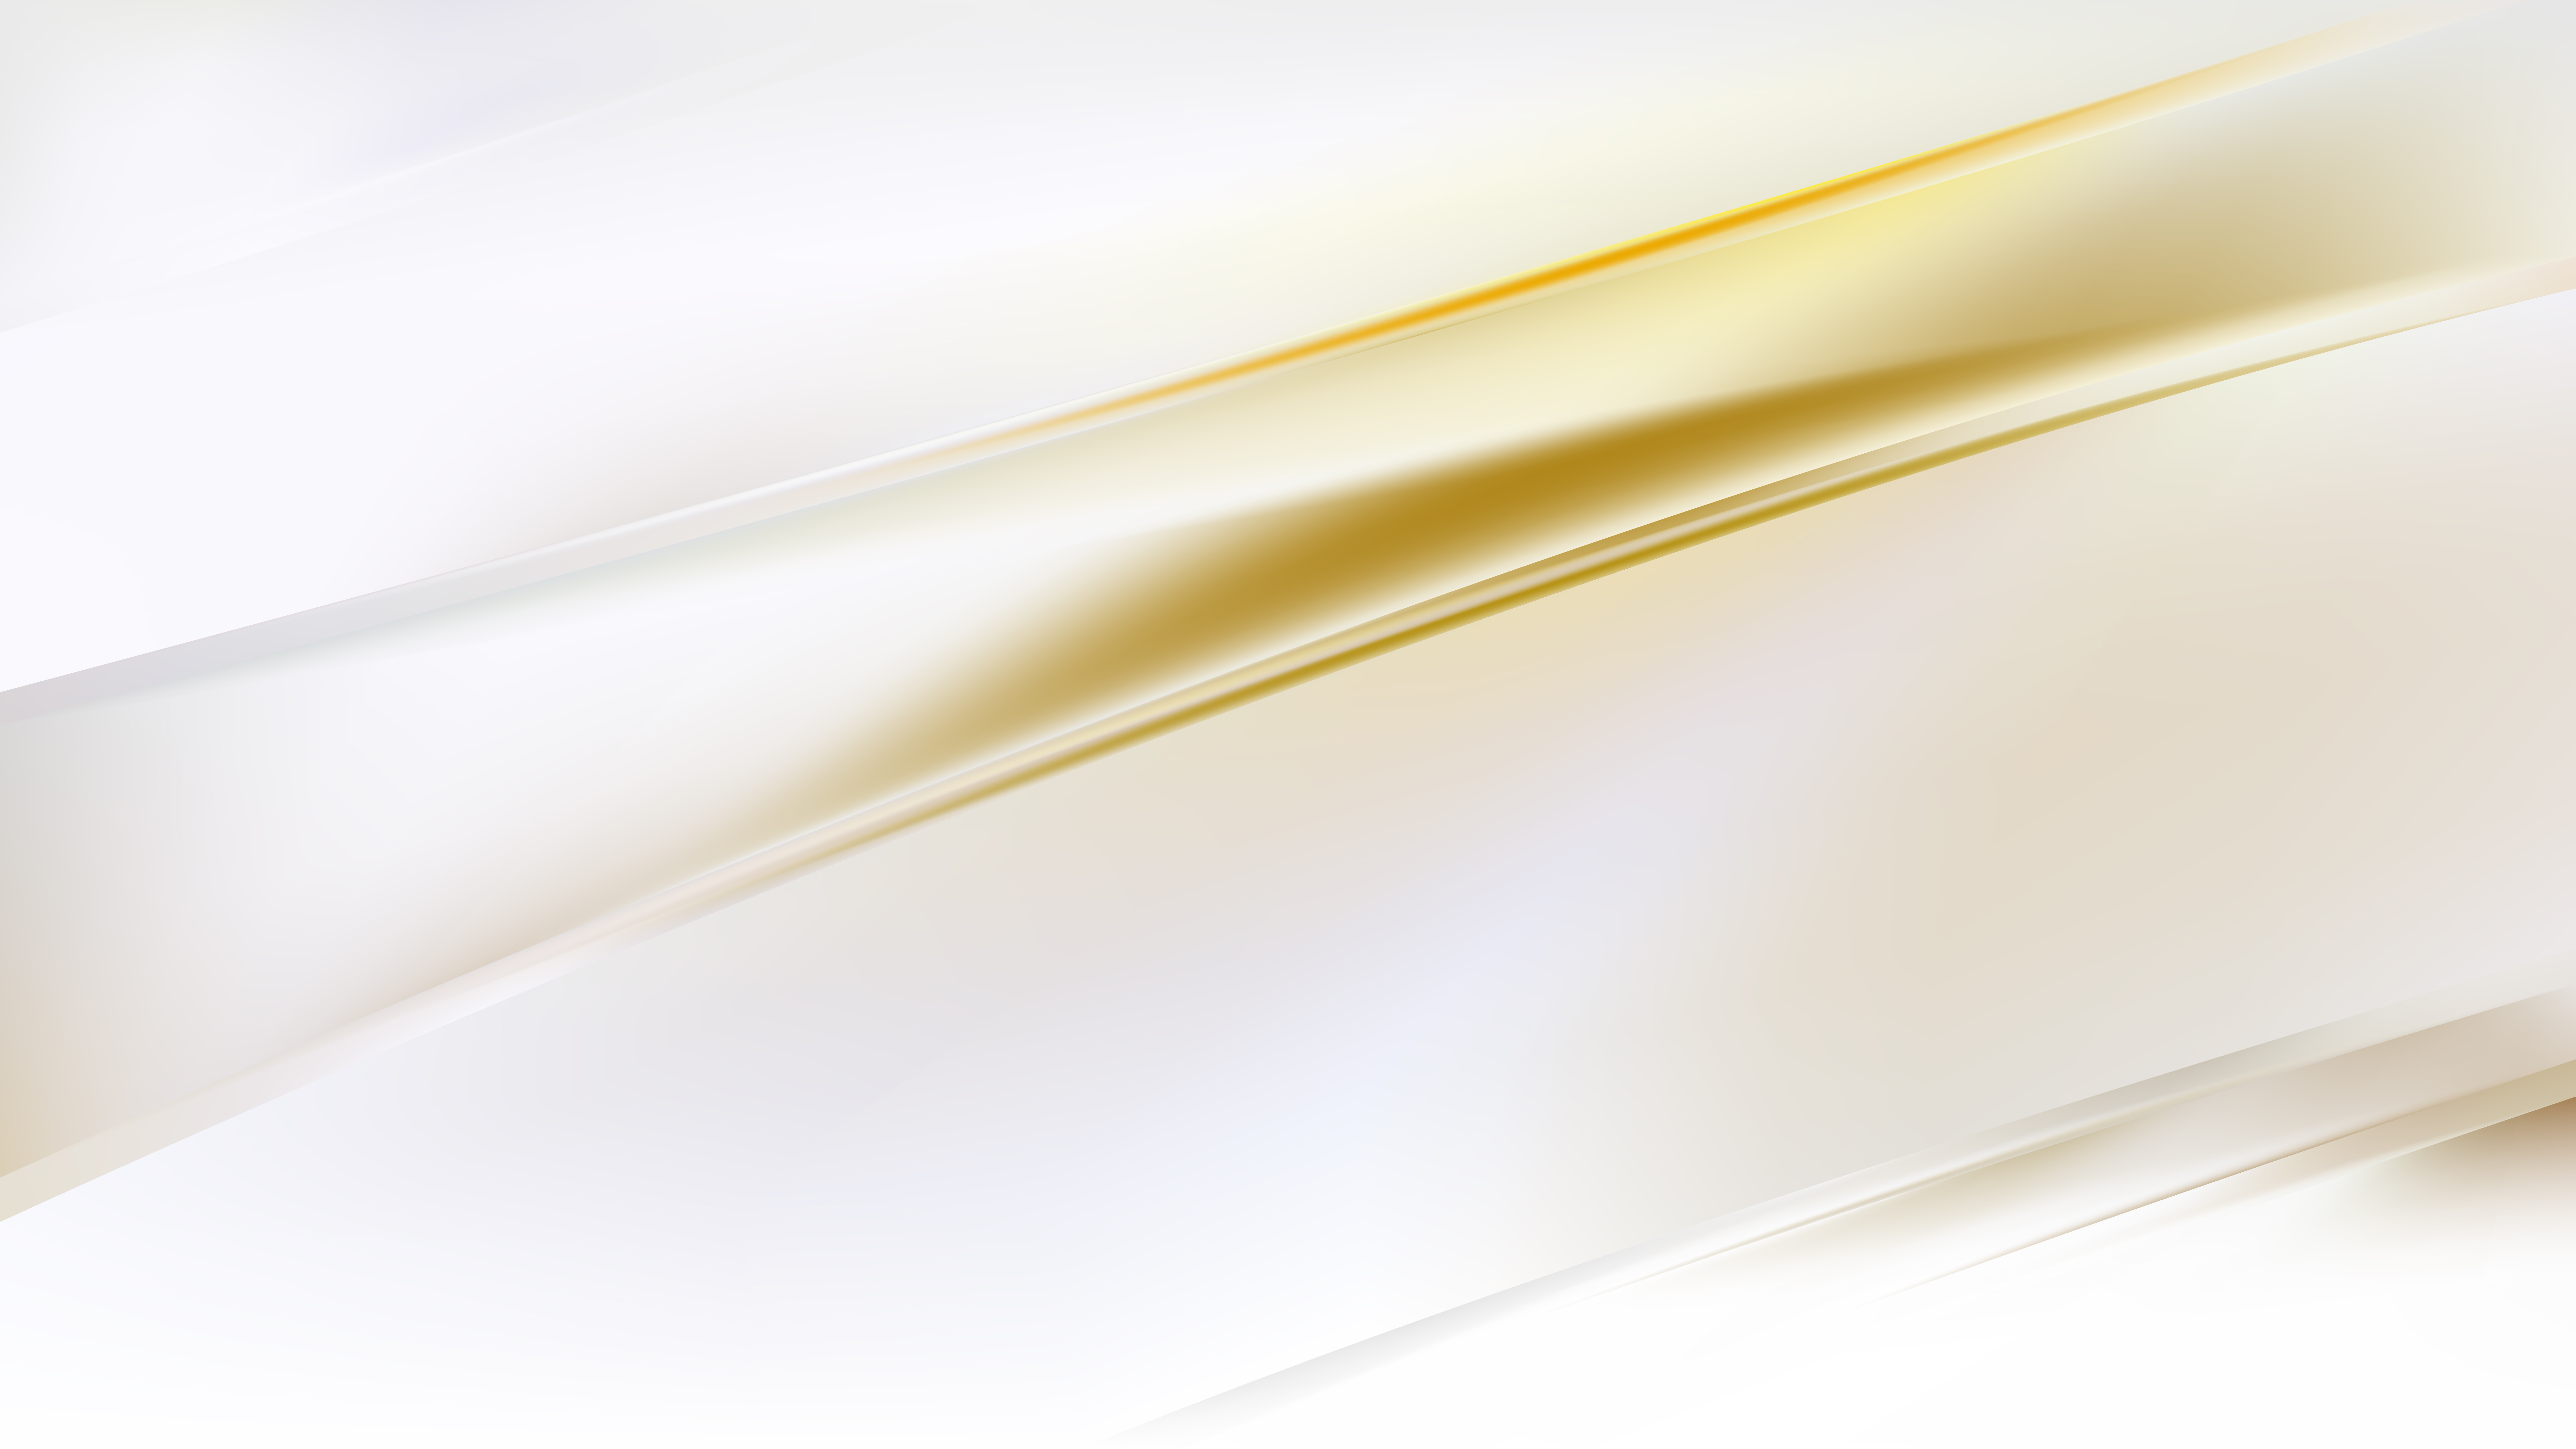 Free Abstract White and Gold Diagonal Shiny Lines Background Vector Image